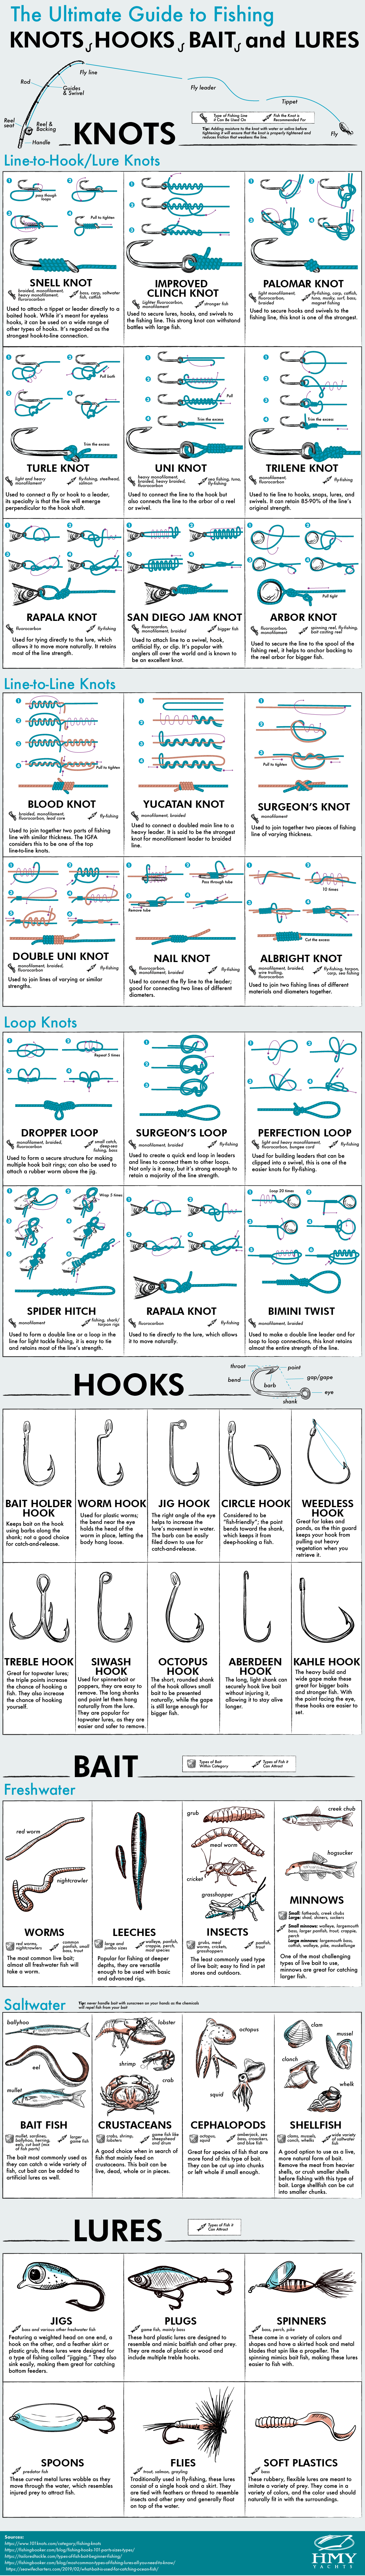 The Ultimate Guide to Fishing Knots, Hooks, Bait, and Lures - HMY.com - Infographic